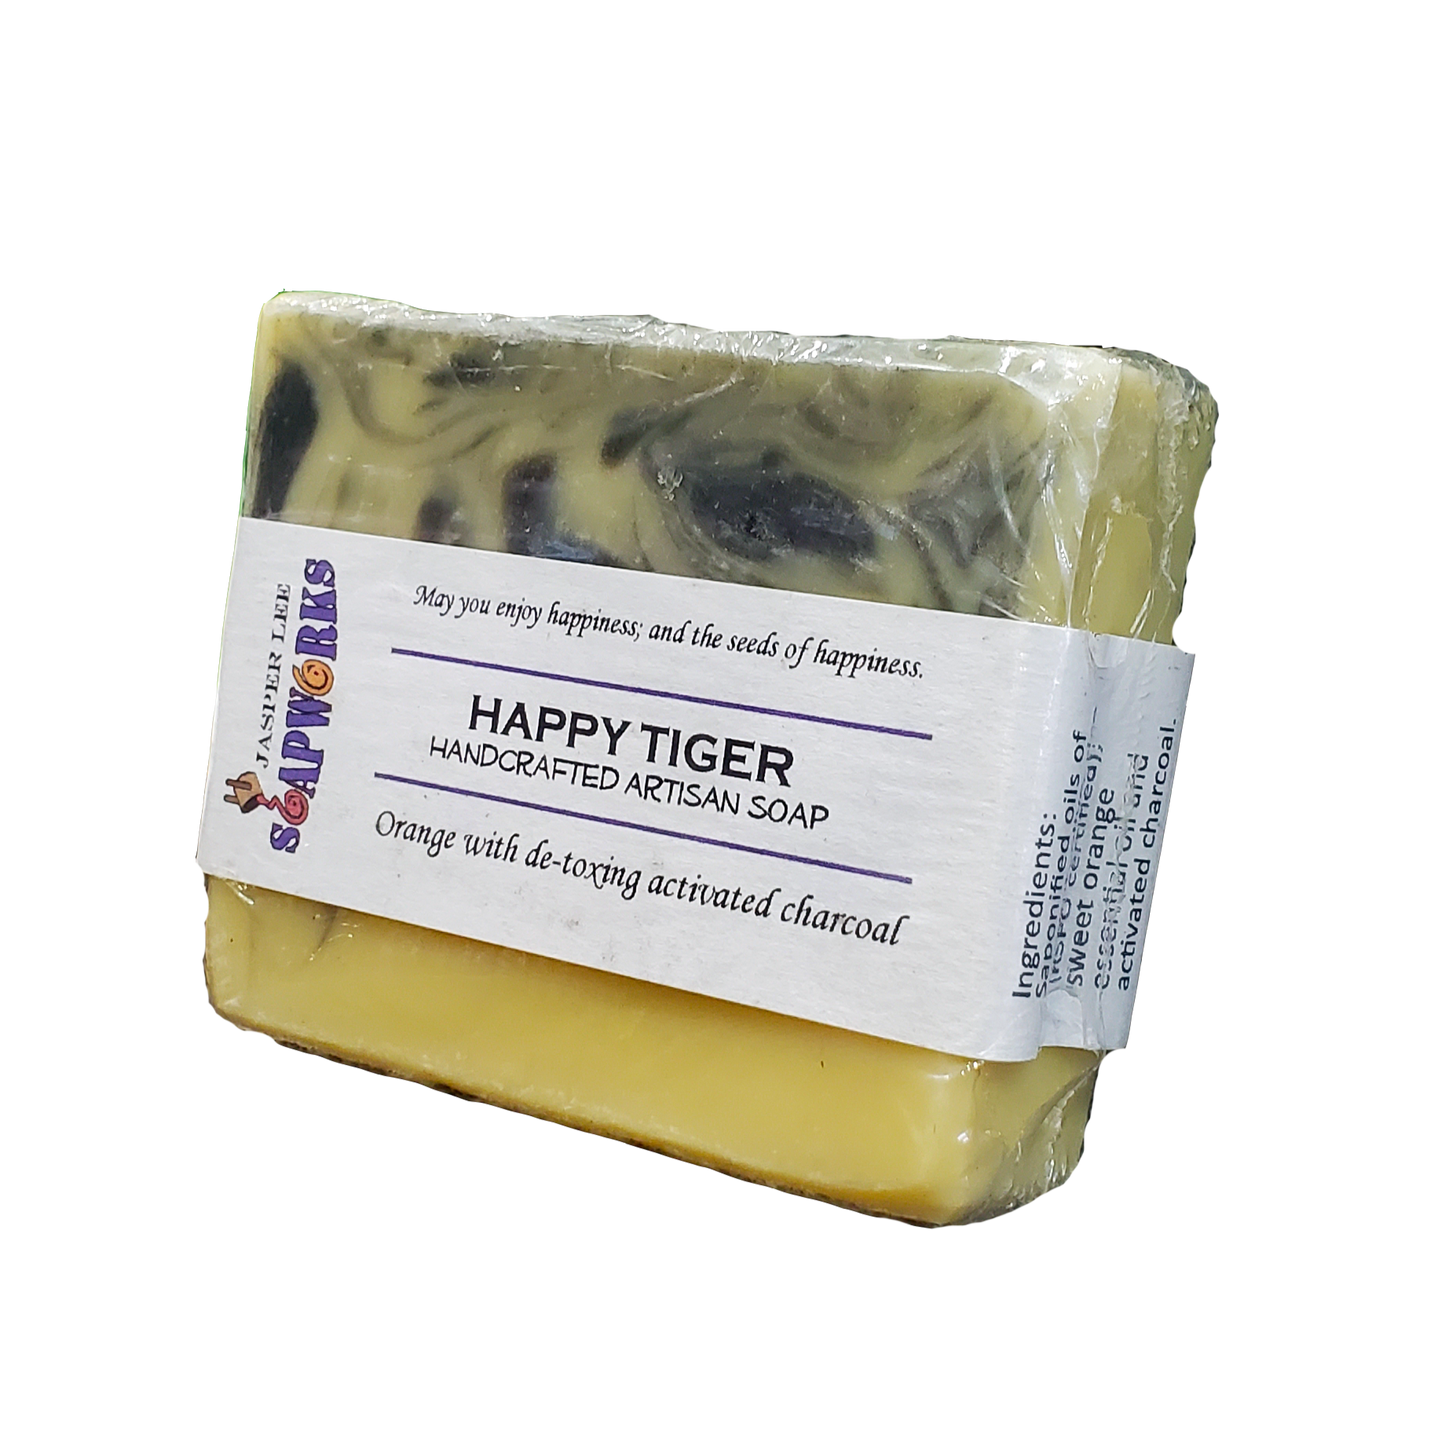 Happy Tiger Handcrafted artisan soap in clear biodegradable packaging